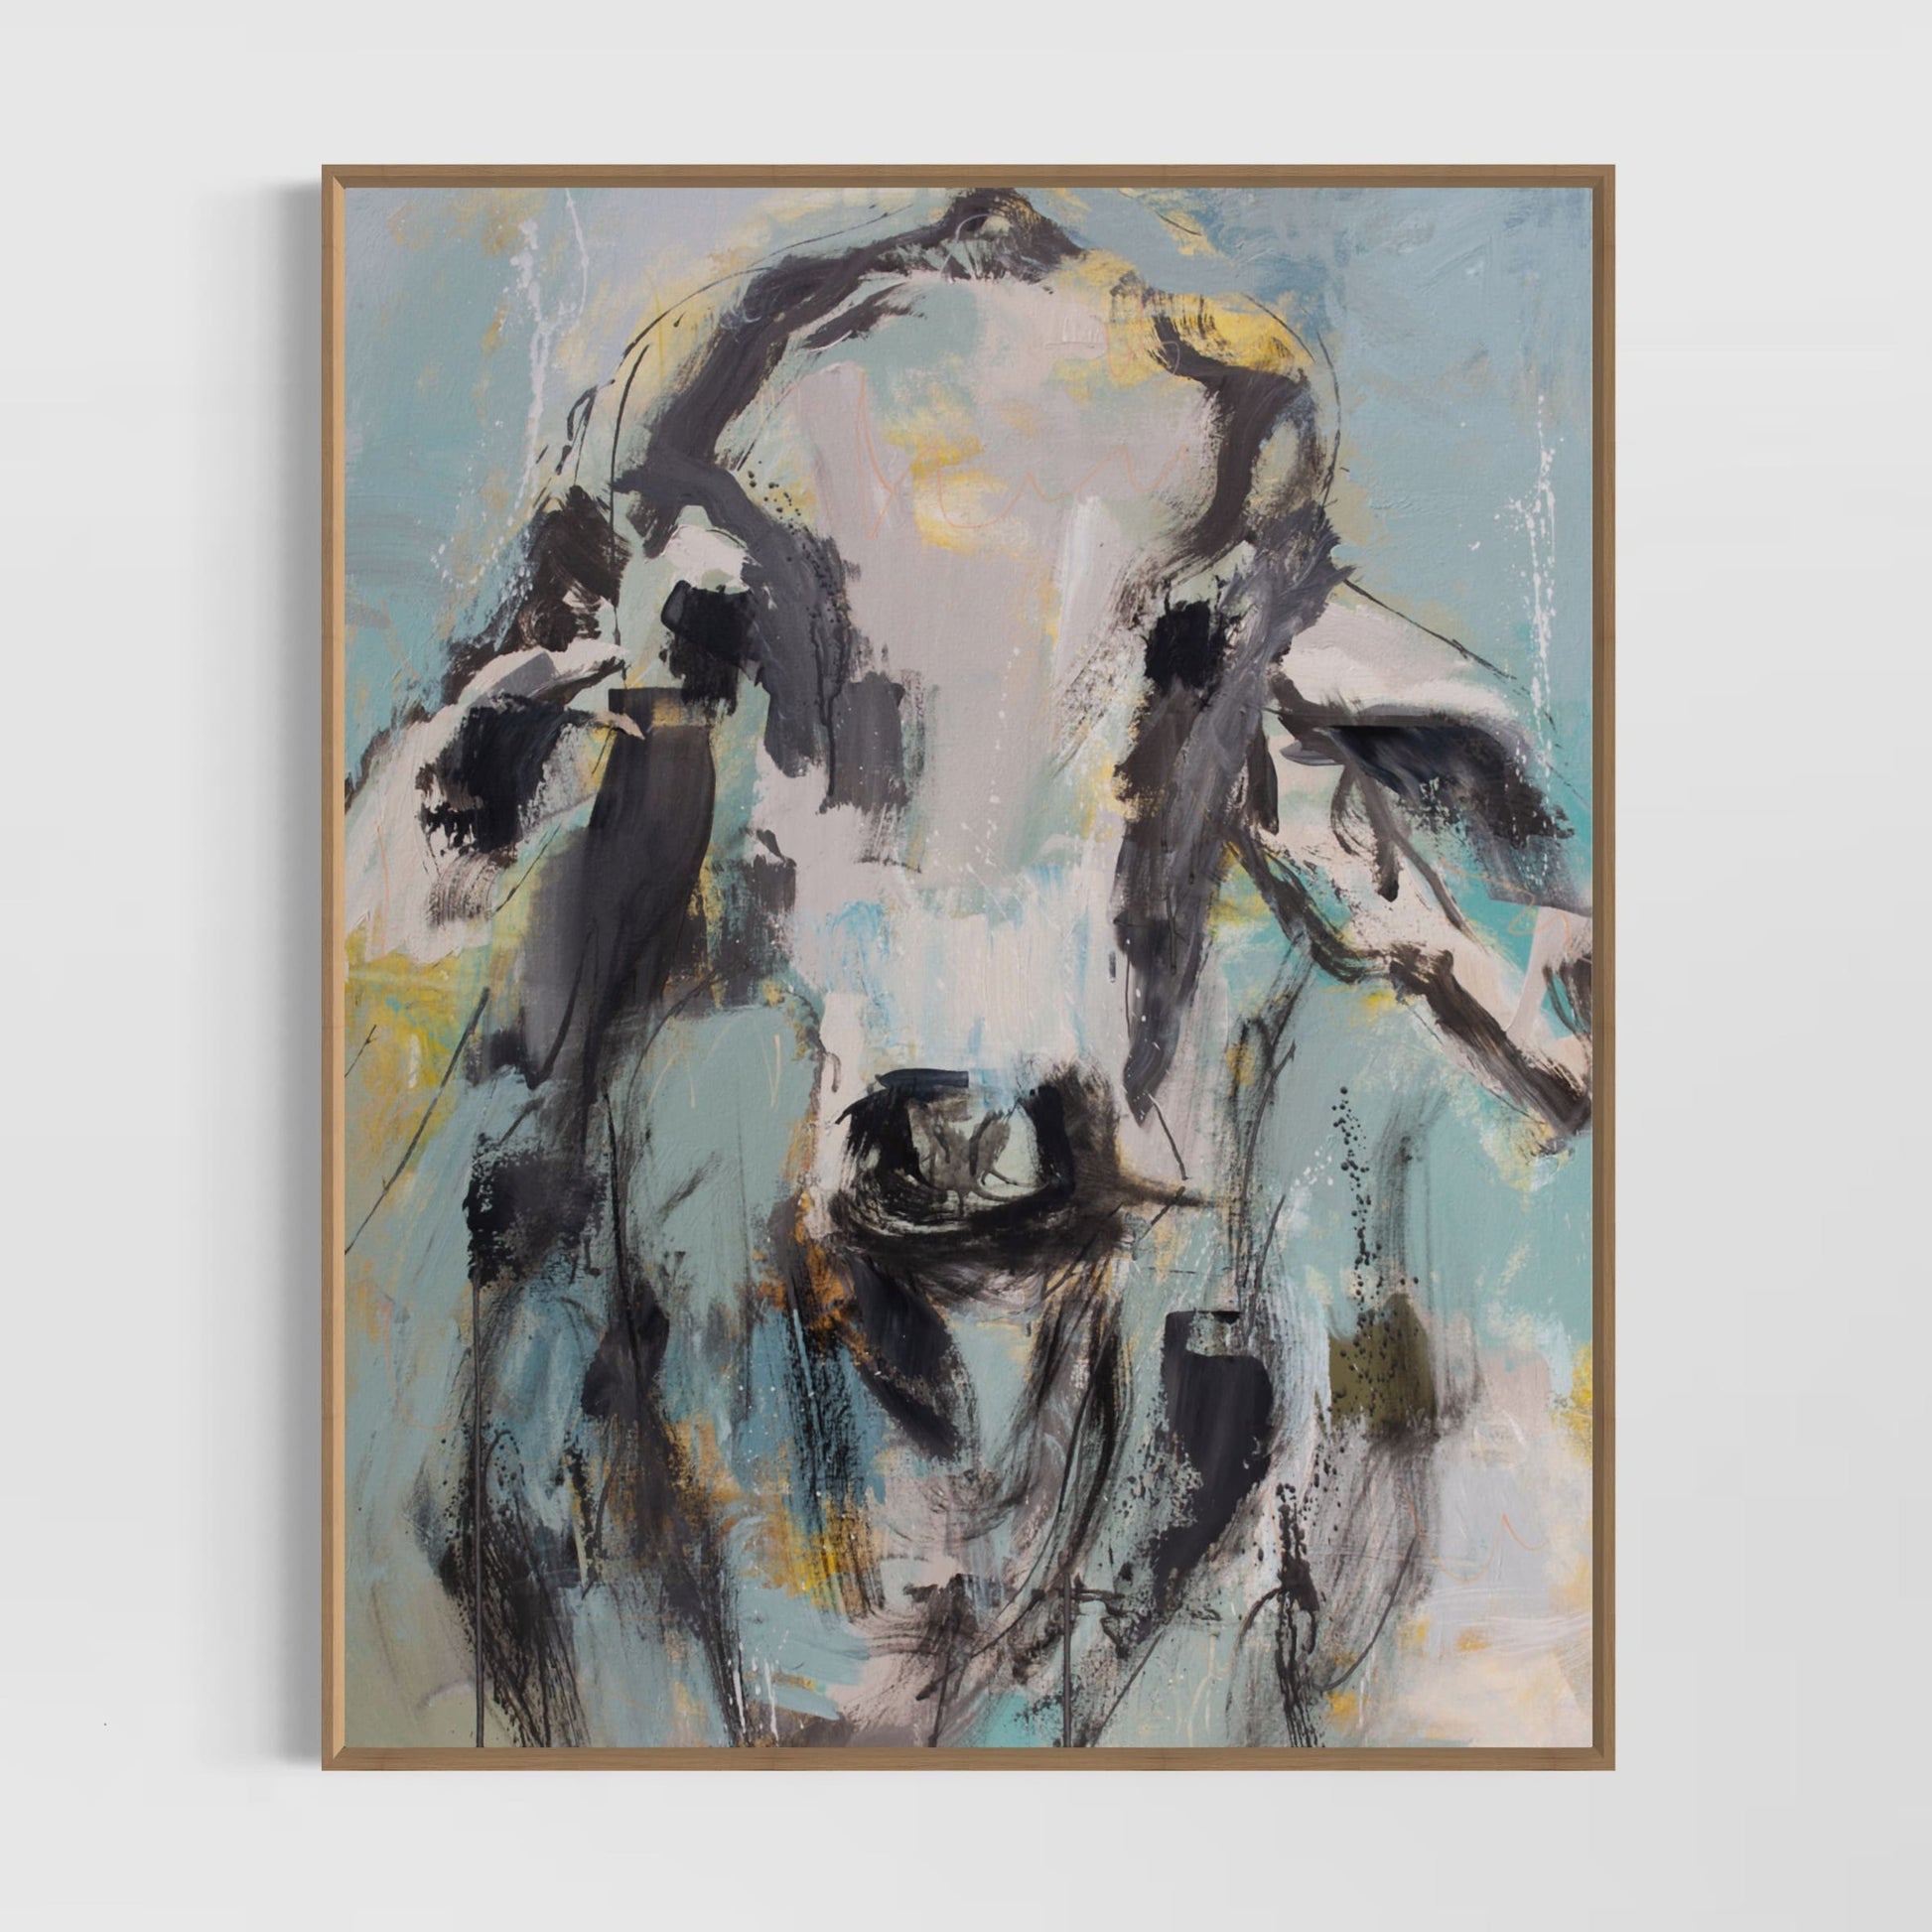 Xena - by Australian Artist Rose Hewartson Original Abstract Cow Painting on Canvas Framed 96x123 cm Statement Piece